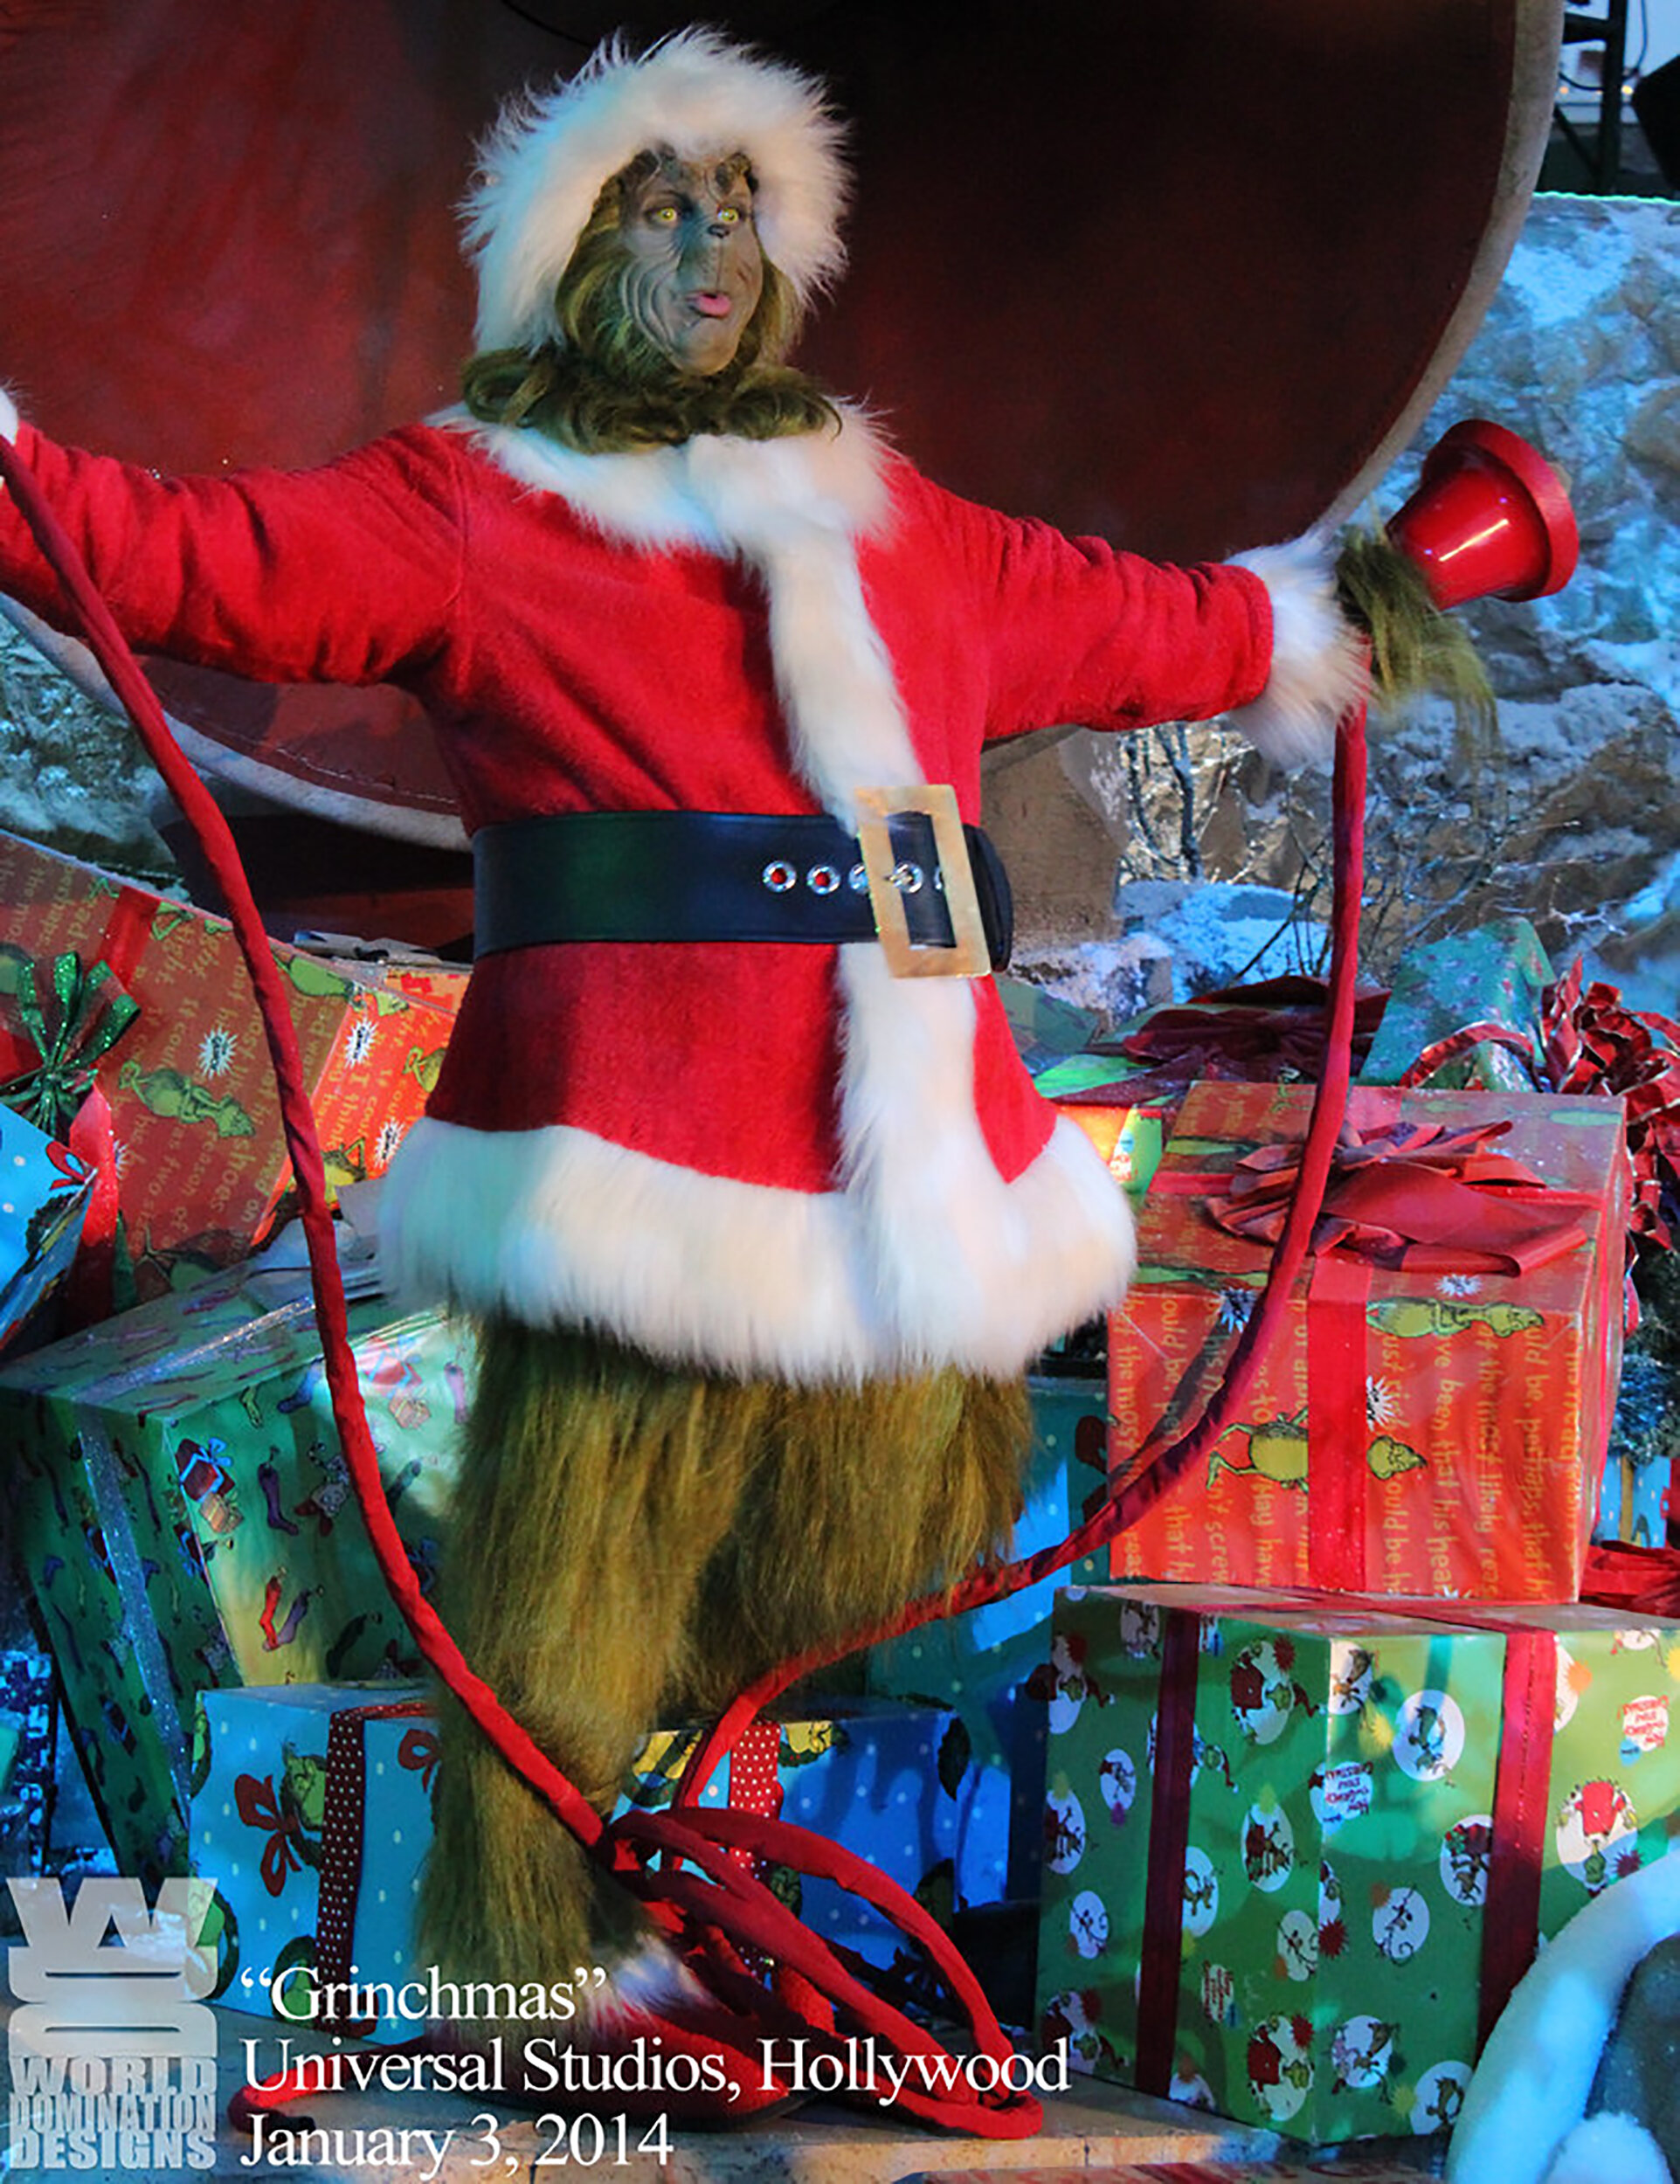 WTF?: Every Who down in Whoville liked Christmas a lot, but the